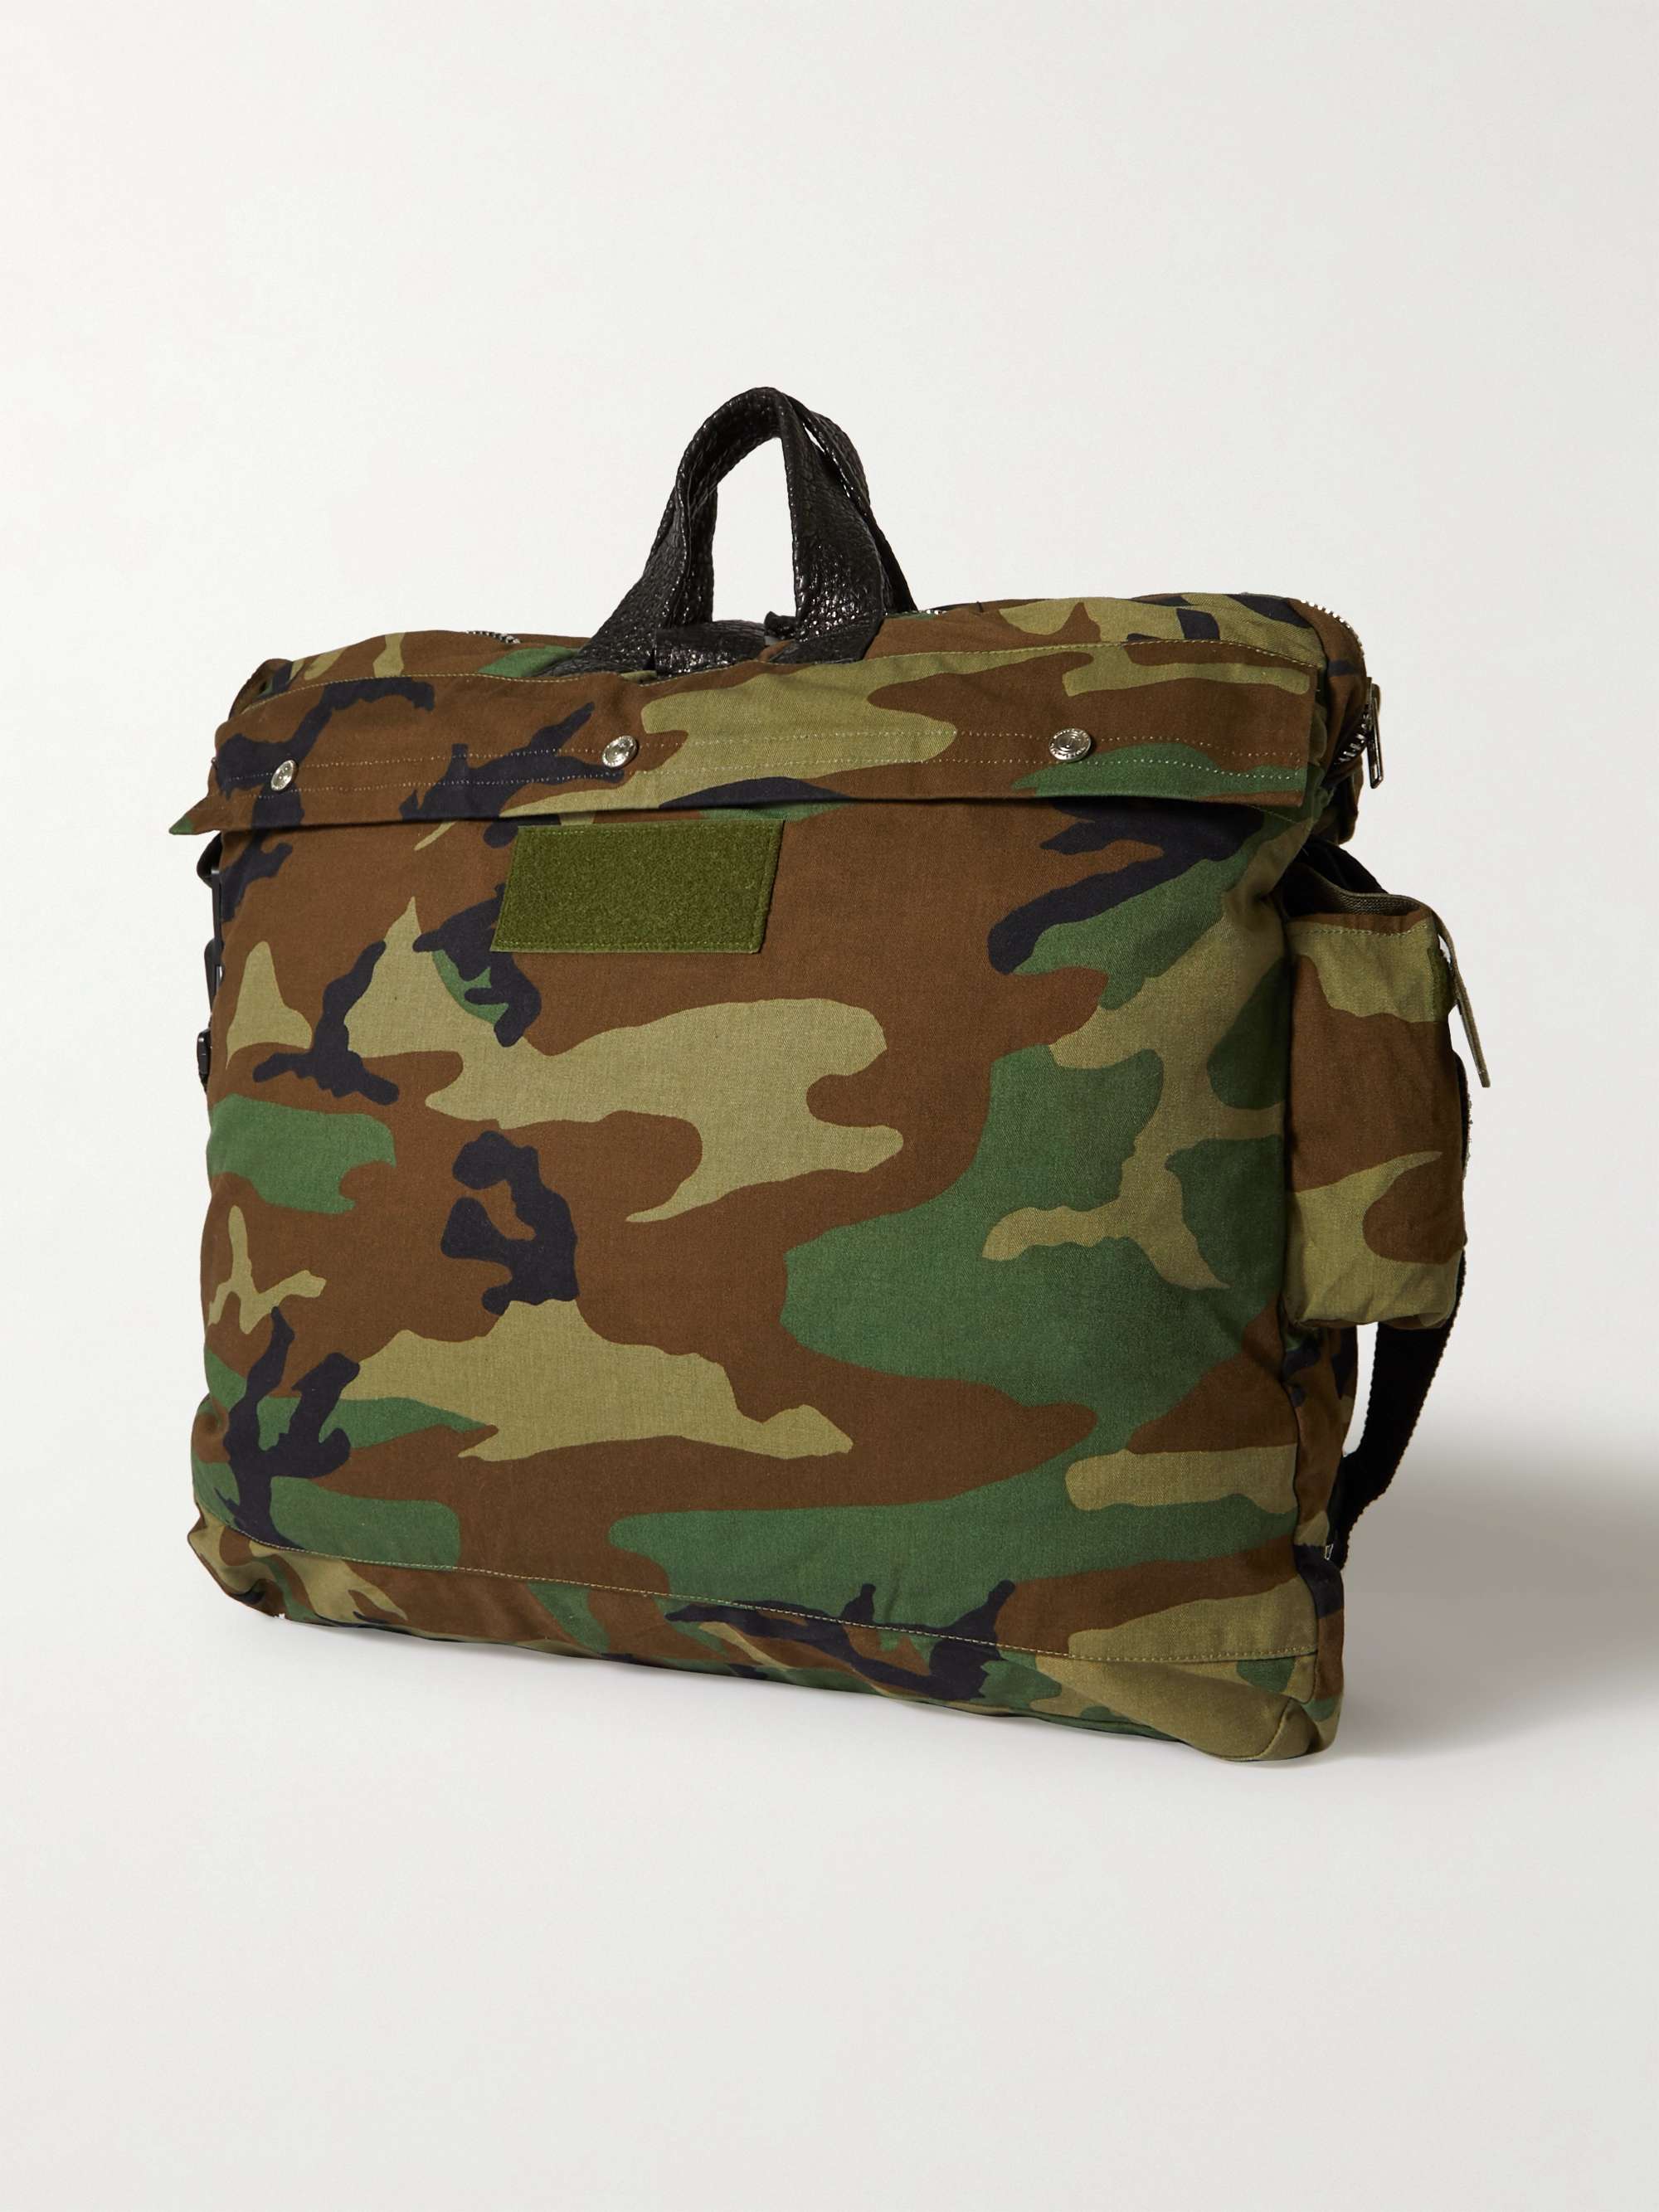 GALLERY DEPT. Leather-Trimmed Camouflage-Print Twill Messenger Bag